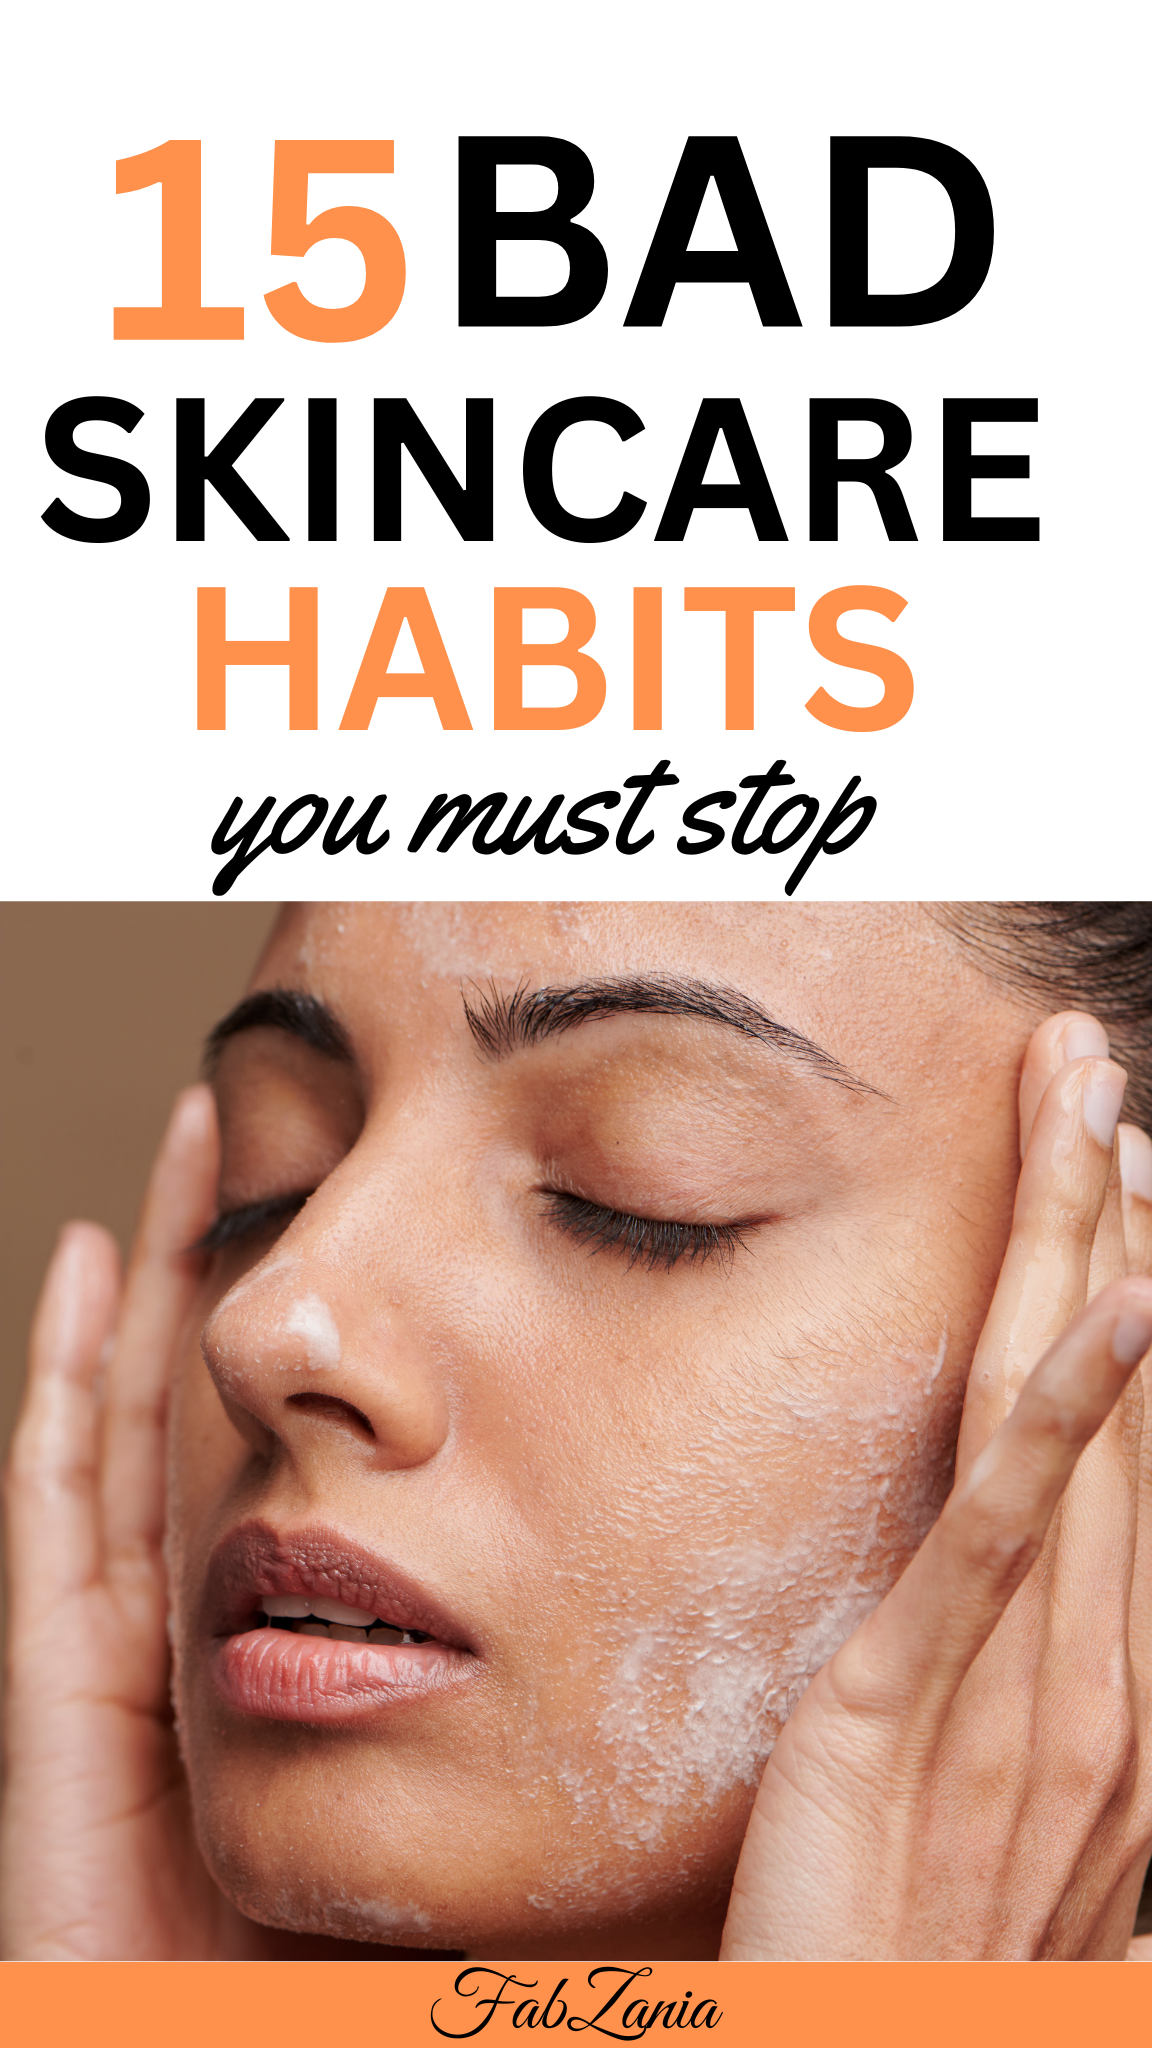 Bad Skincare Habits You Must Stop Now